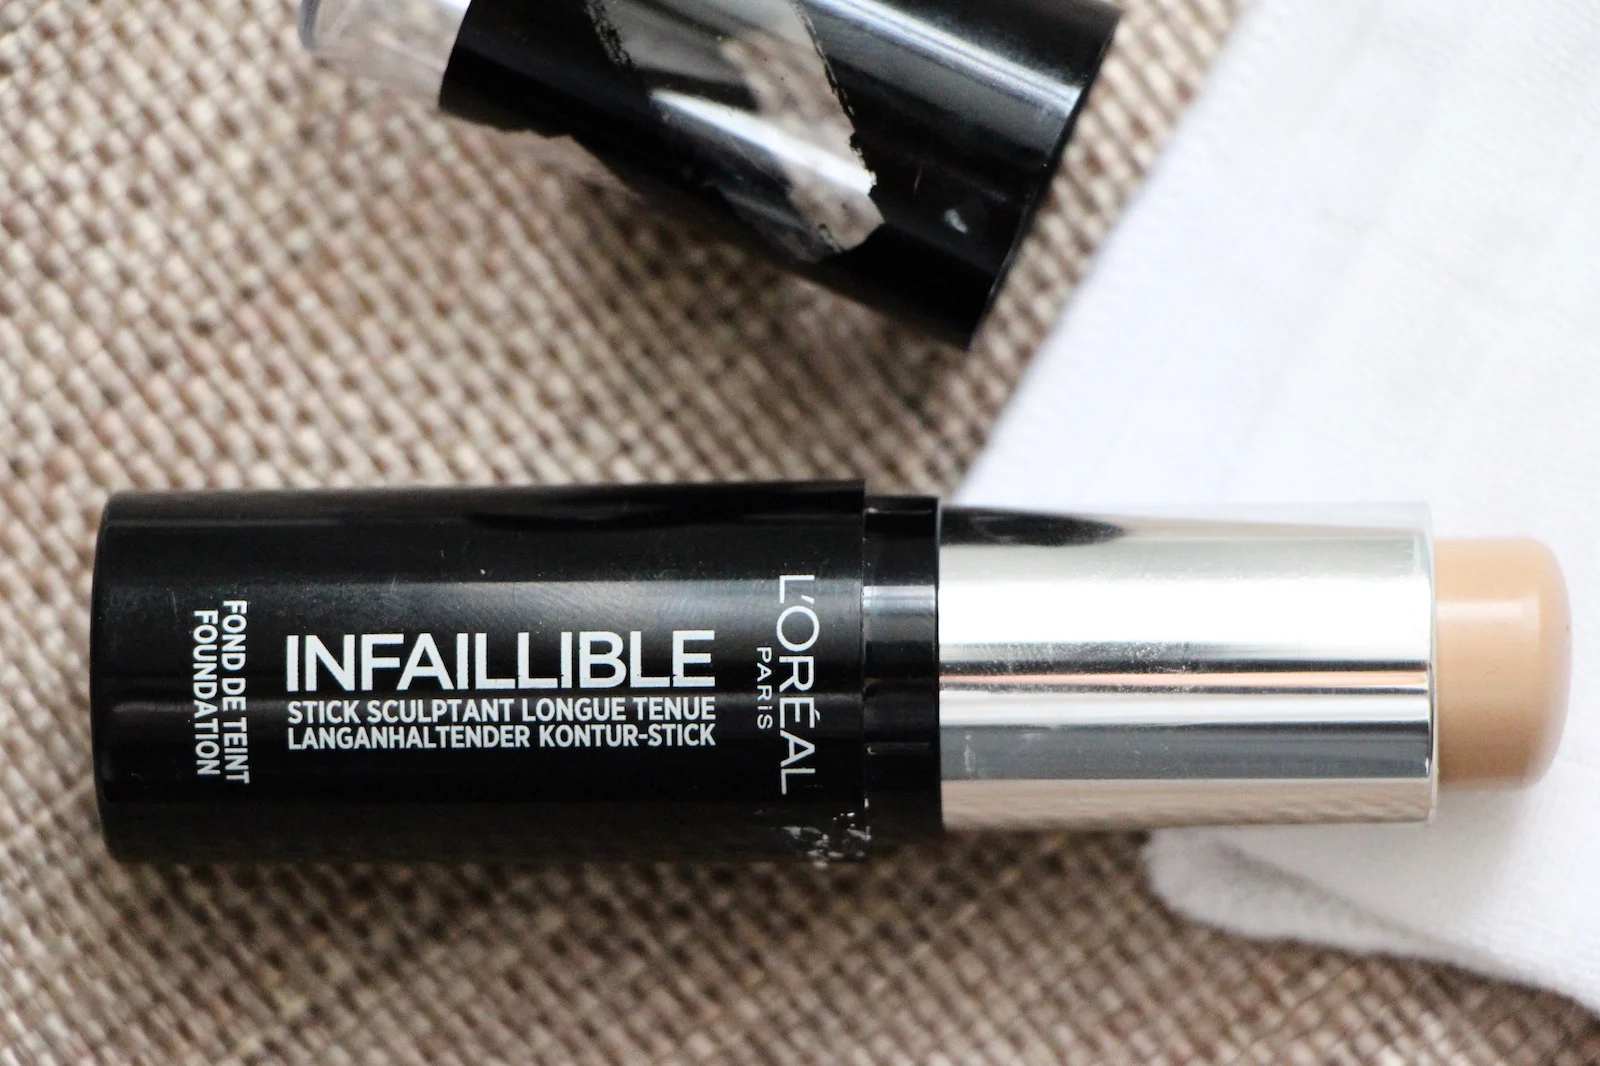 Foundation Review: L’Oreal Paris Infallible Shaping Stick